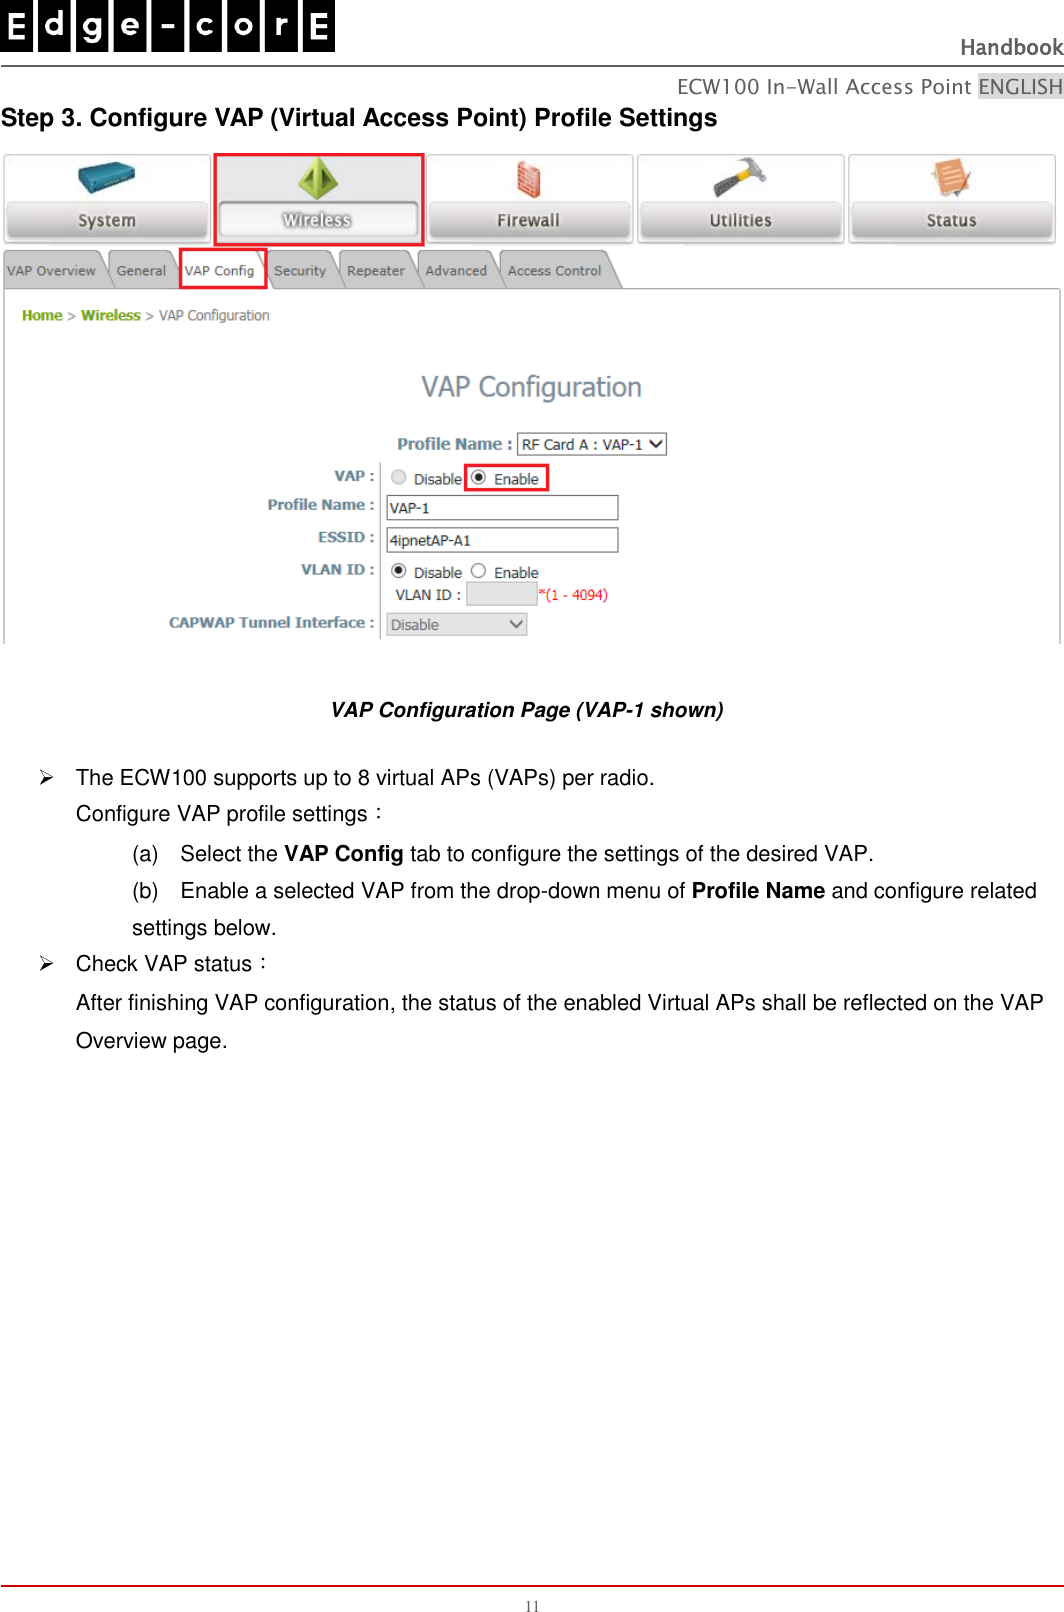   Handbook ECW100 In-Wall Access Point ENGLISH 11 Step 3. Configure VAP (Virtual Access Point) Profile Settings  VAP Configuration Page (VAP-1 shown)   The ECW100 supports up to 8 virtual APs (VAPs) per radio. Configure VAP profile settings： (a)    Select the VAP Config tab to configure the settings of the desired VAP.   (b)  Enable a selected VAP from the drop-down menu of Profile Name and configure related settings below.   Check VAP status： After finishing VAP configuration, the status of the enabled Virtual APs shall be reflected on the VAP Overview page.              